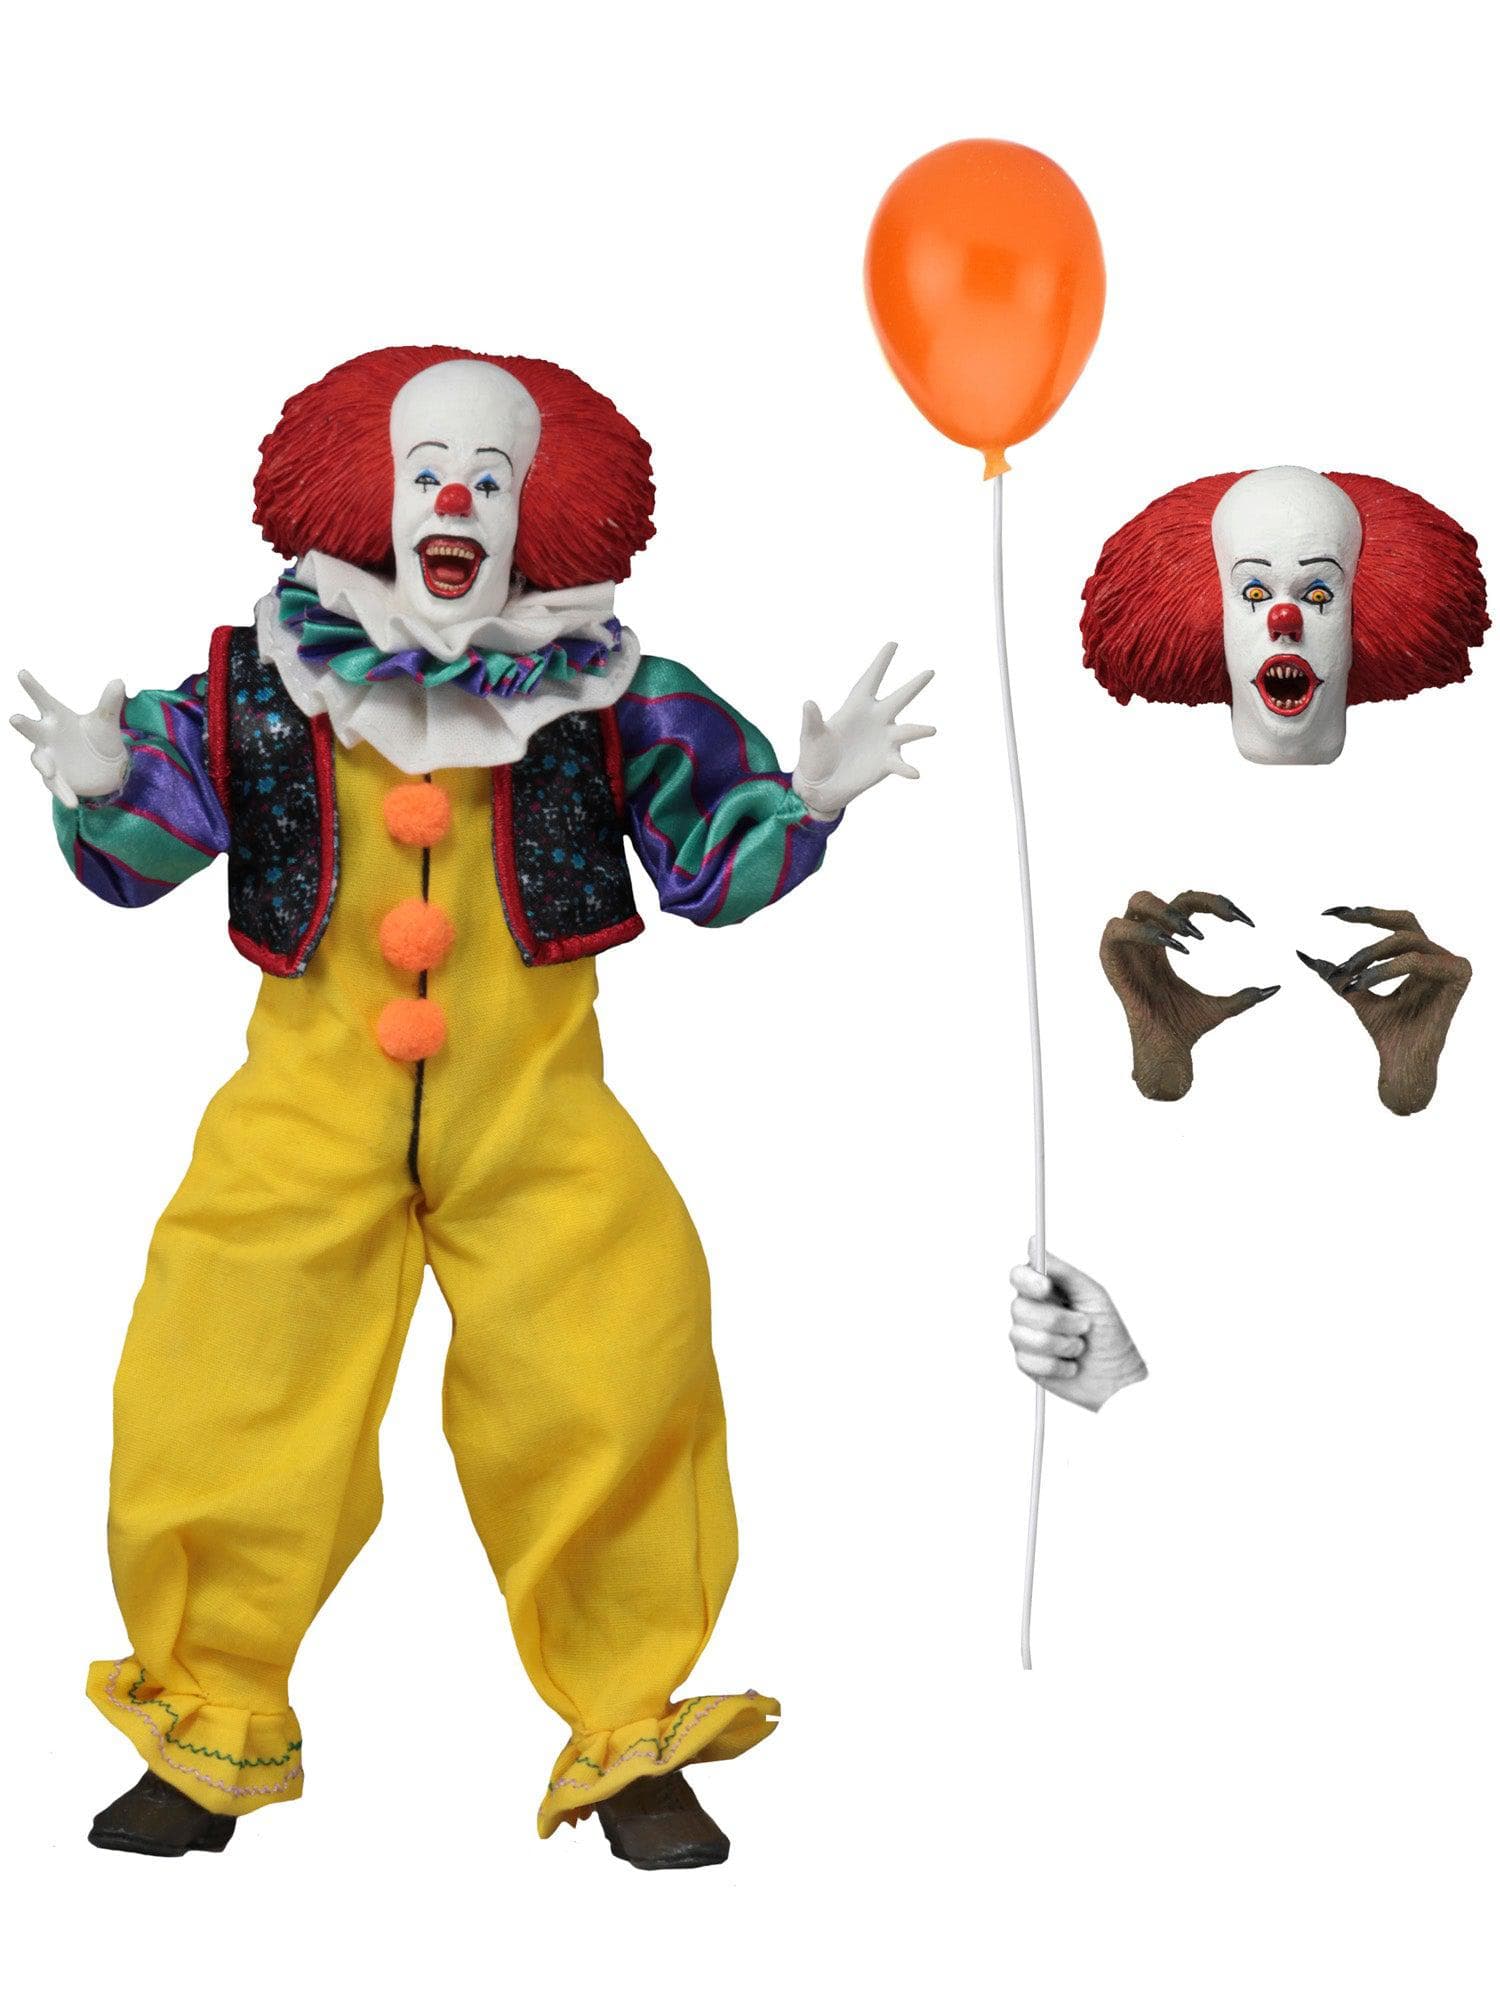 NECA - IT - 8" Clothed Action Figure - Pennywise (1990 Movie) - costumes.com